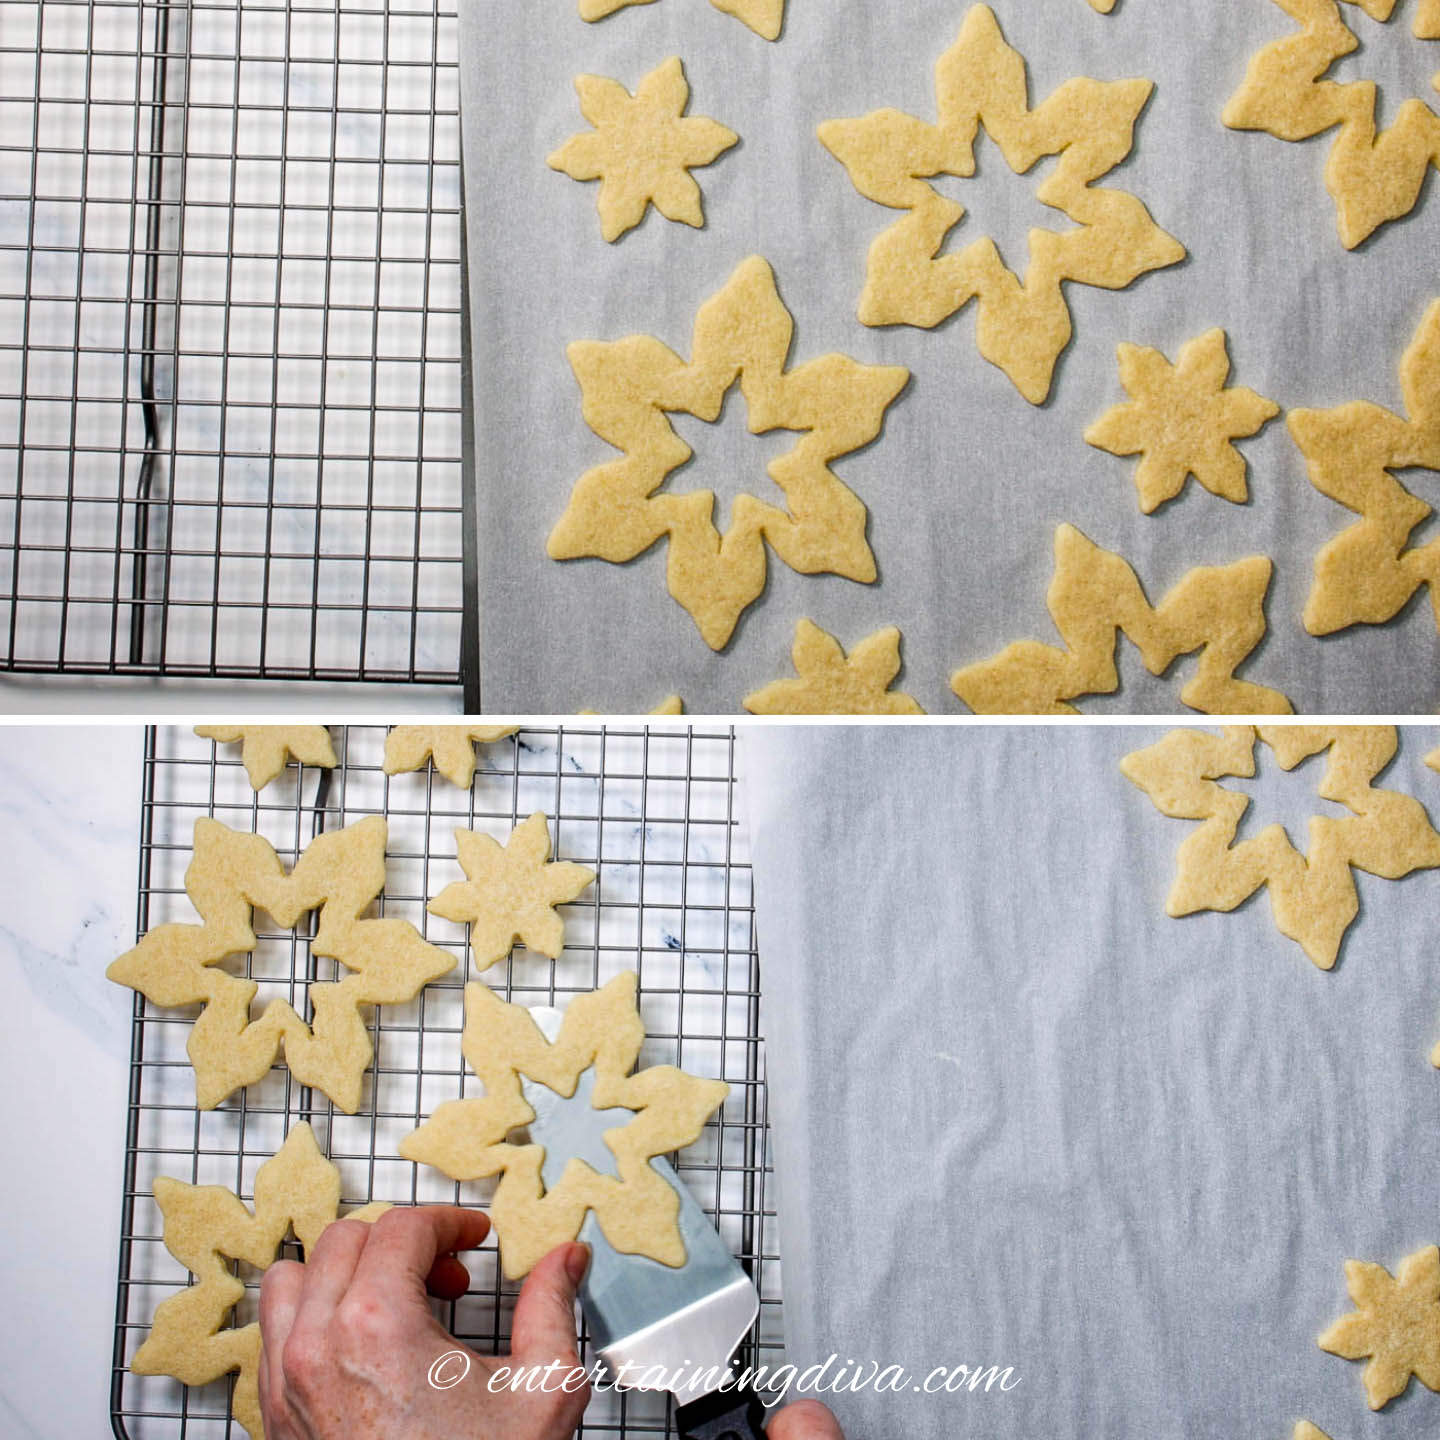 baked snowflake sugar cookies being moved from a cookie sheet to cooling racks